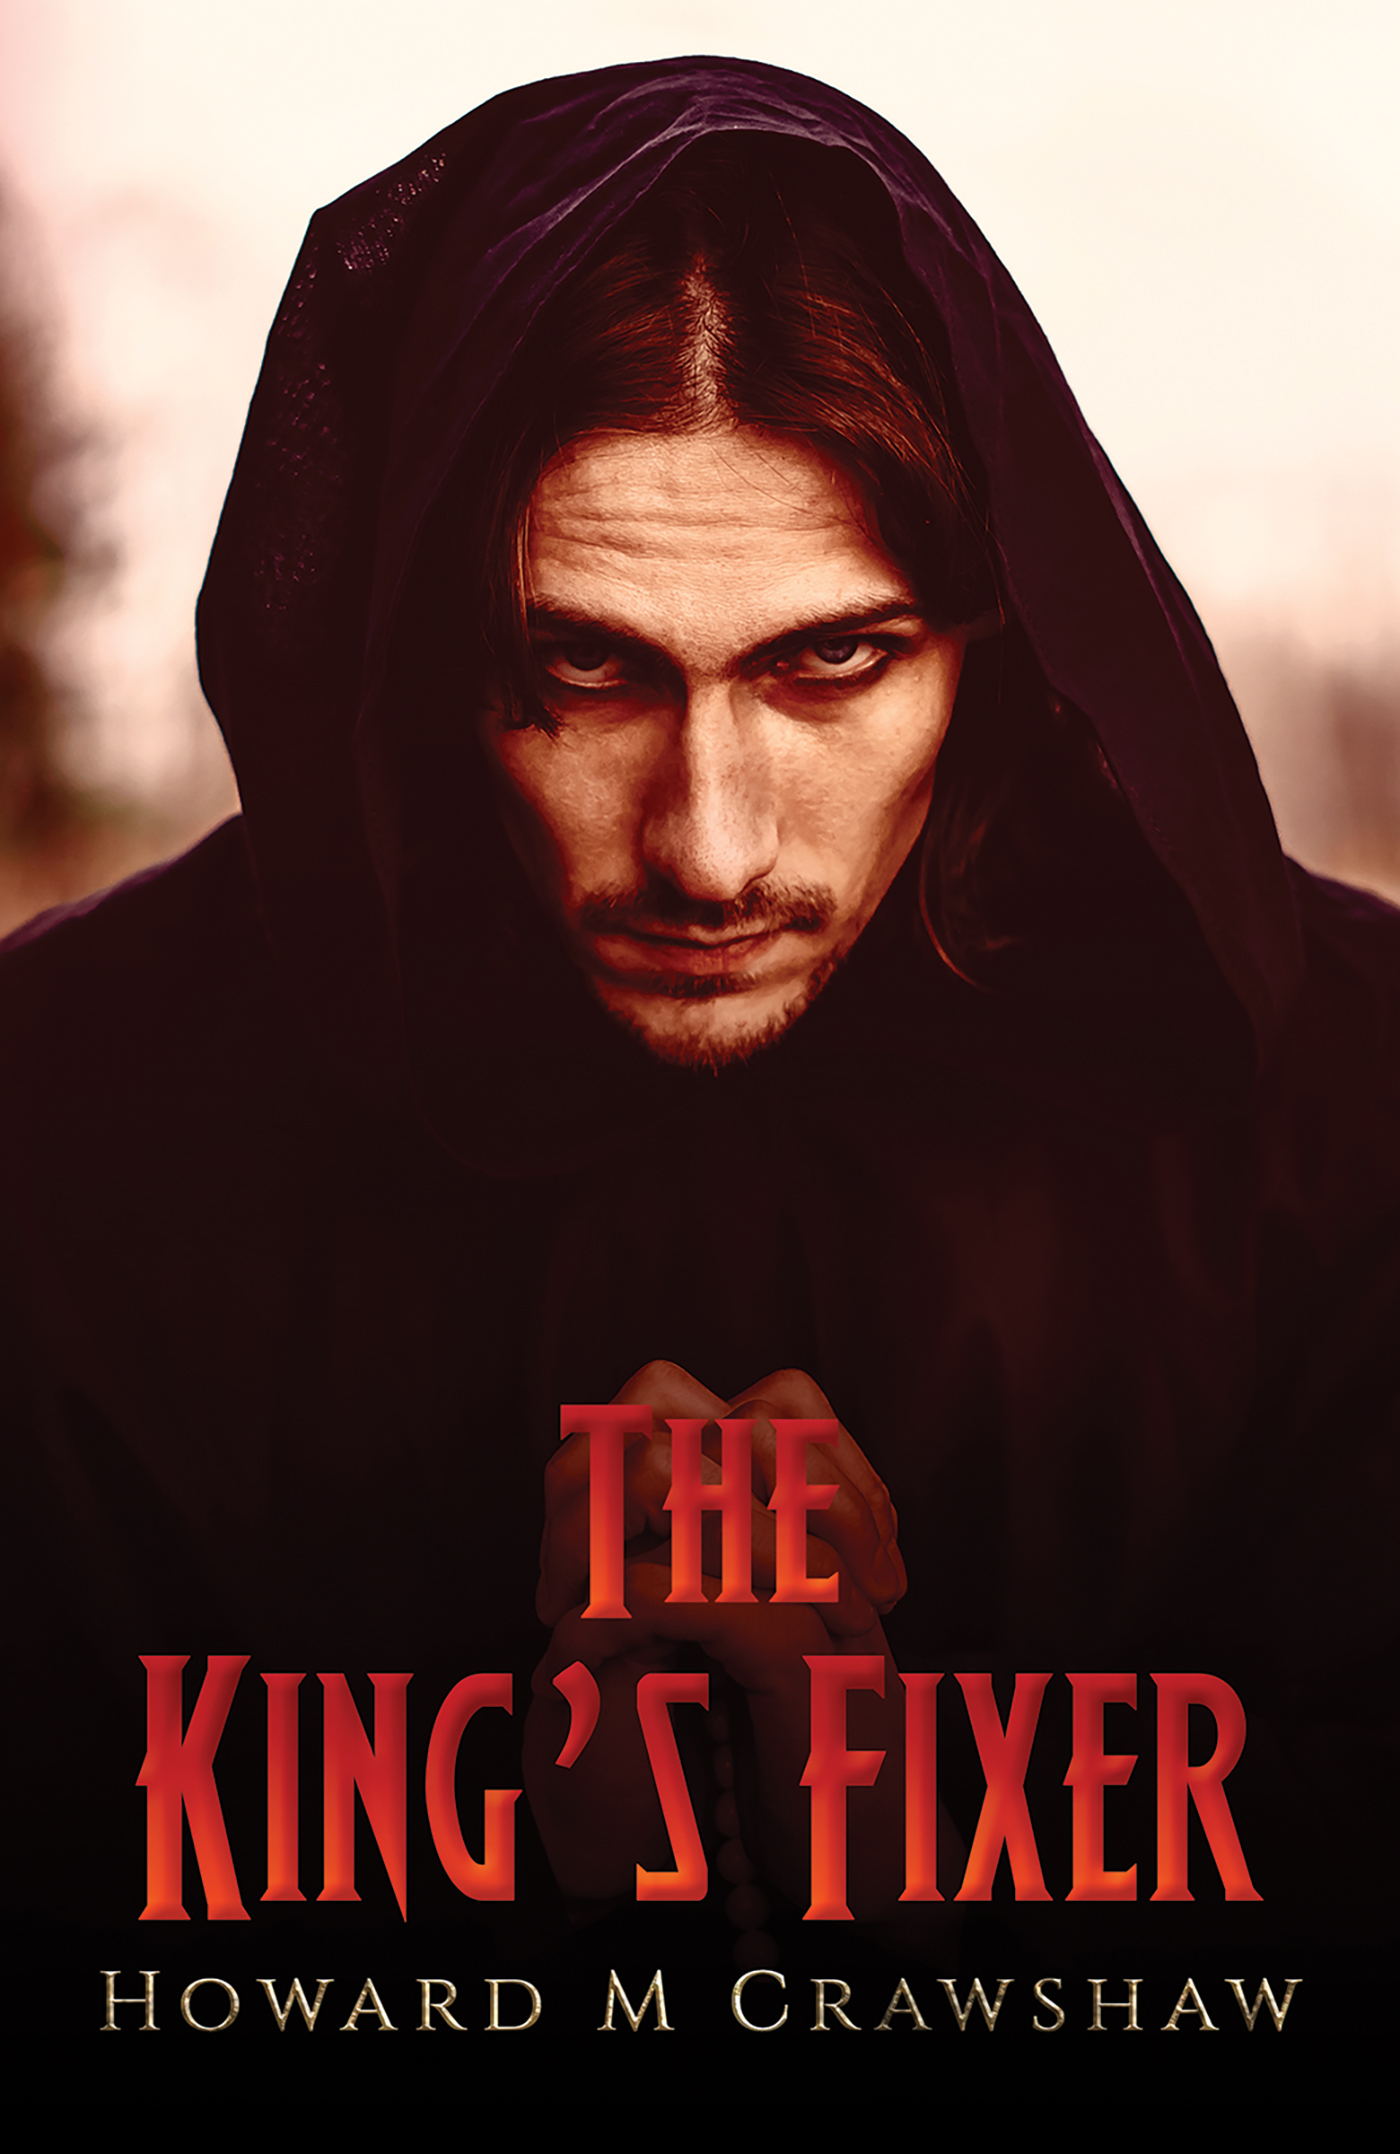 The King's Fixer